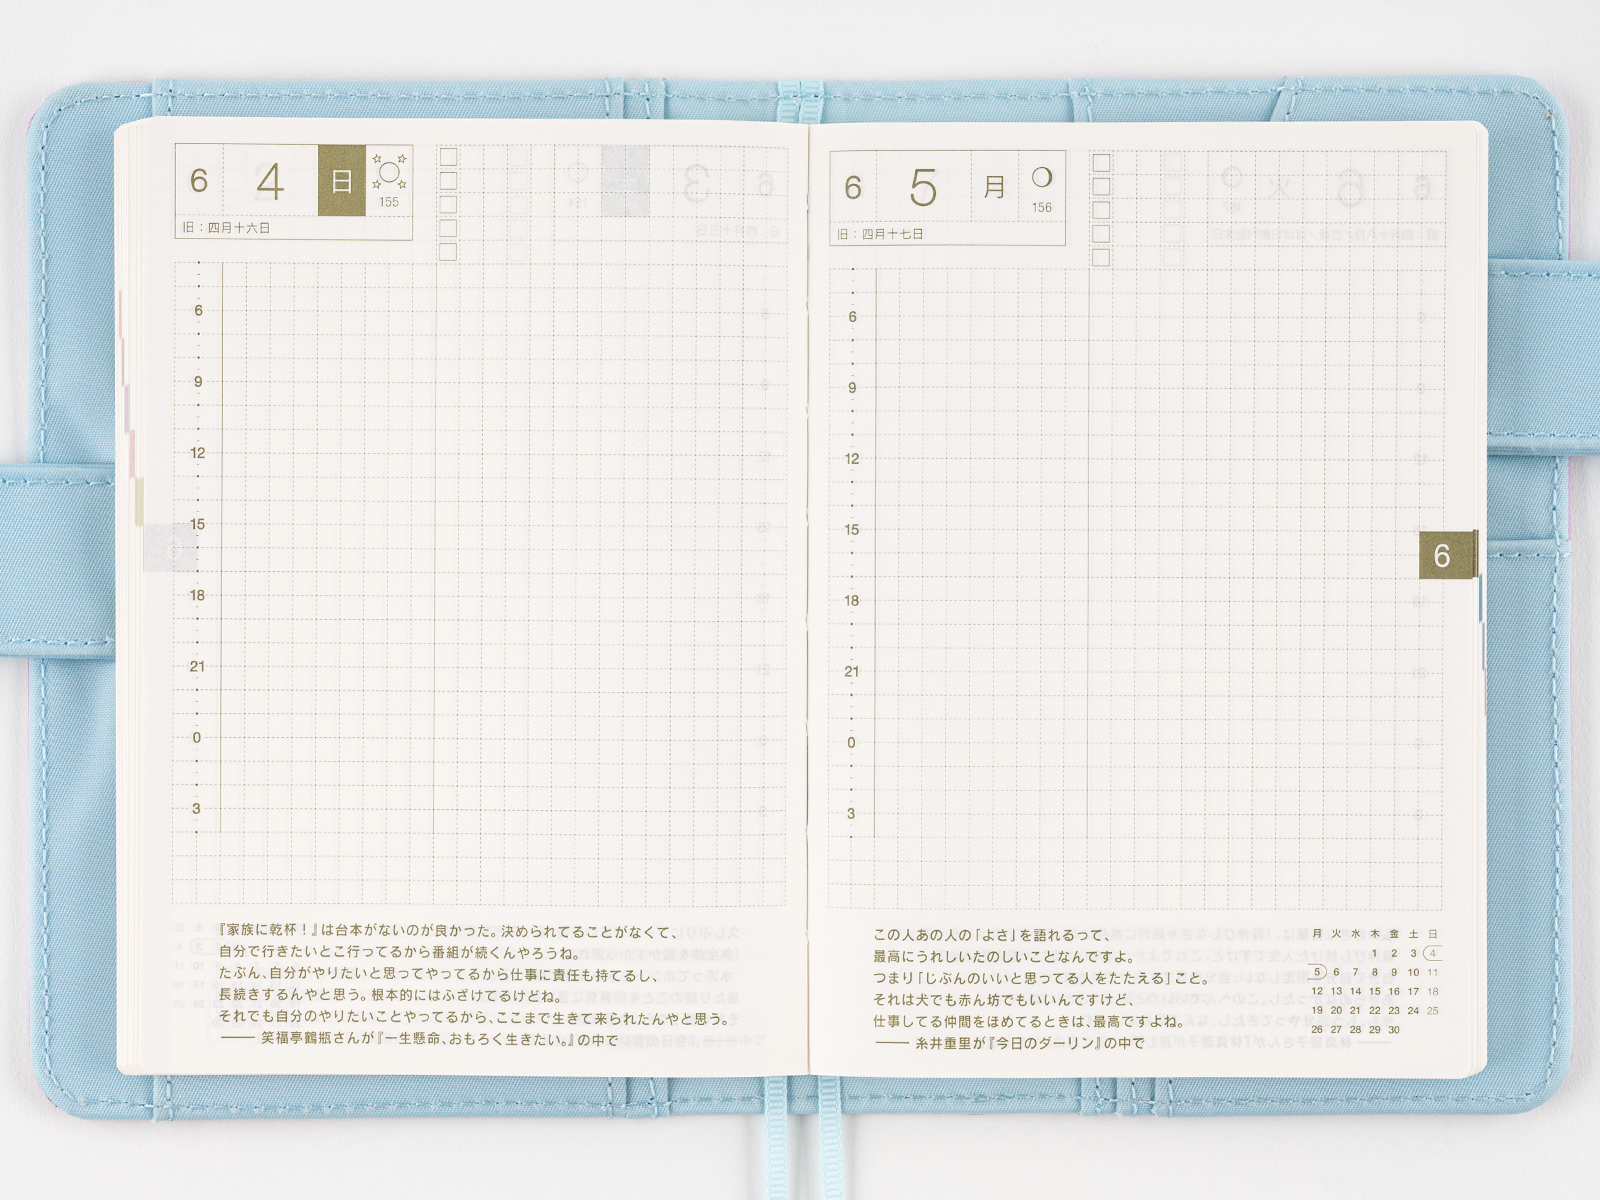 Hobonichi A6 Original, A6 English Planner, and A6 Day Free Yearly